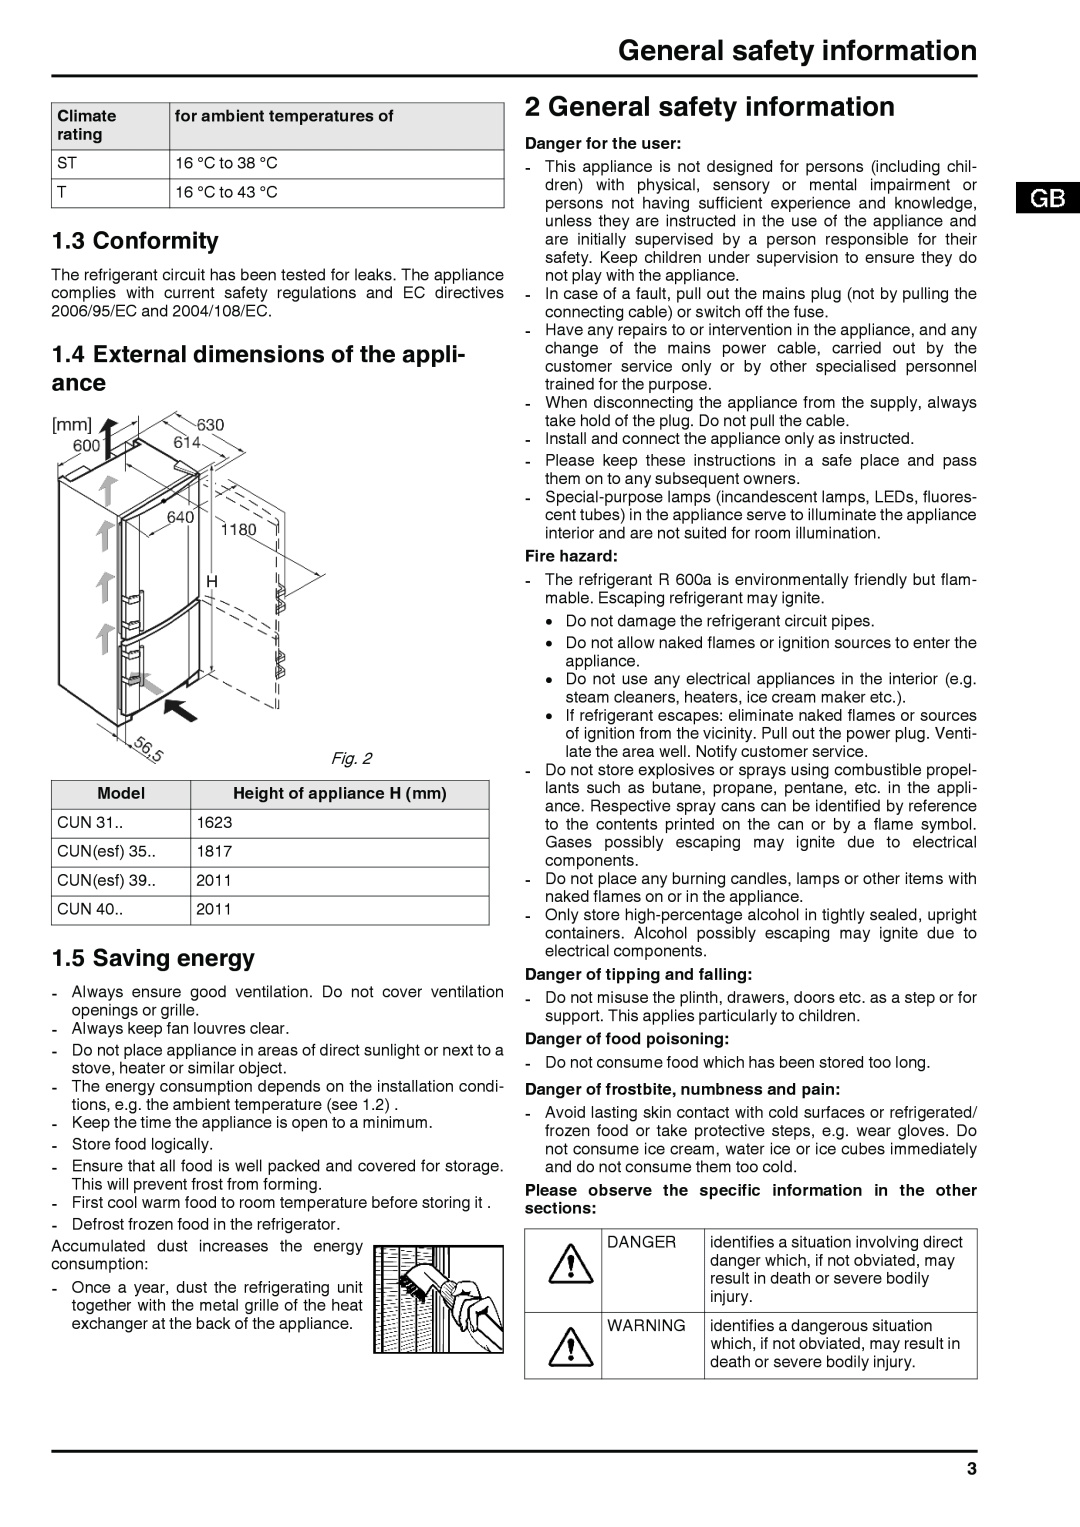 Liebherr 290910 7084364 - 03 General safety information, Conformity, External dimensions of the appli- ance, Saving energy 